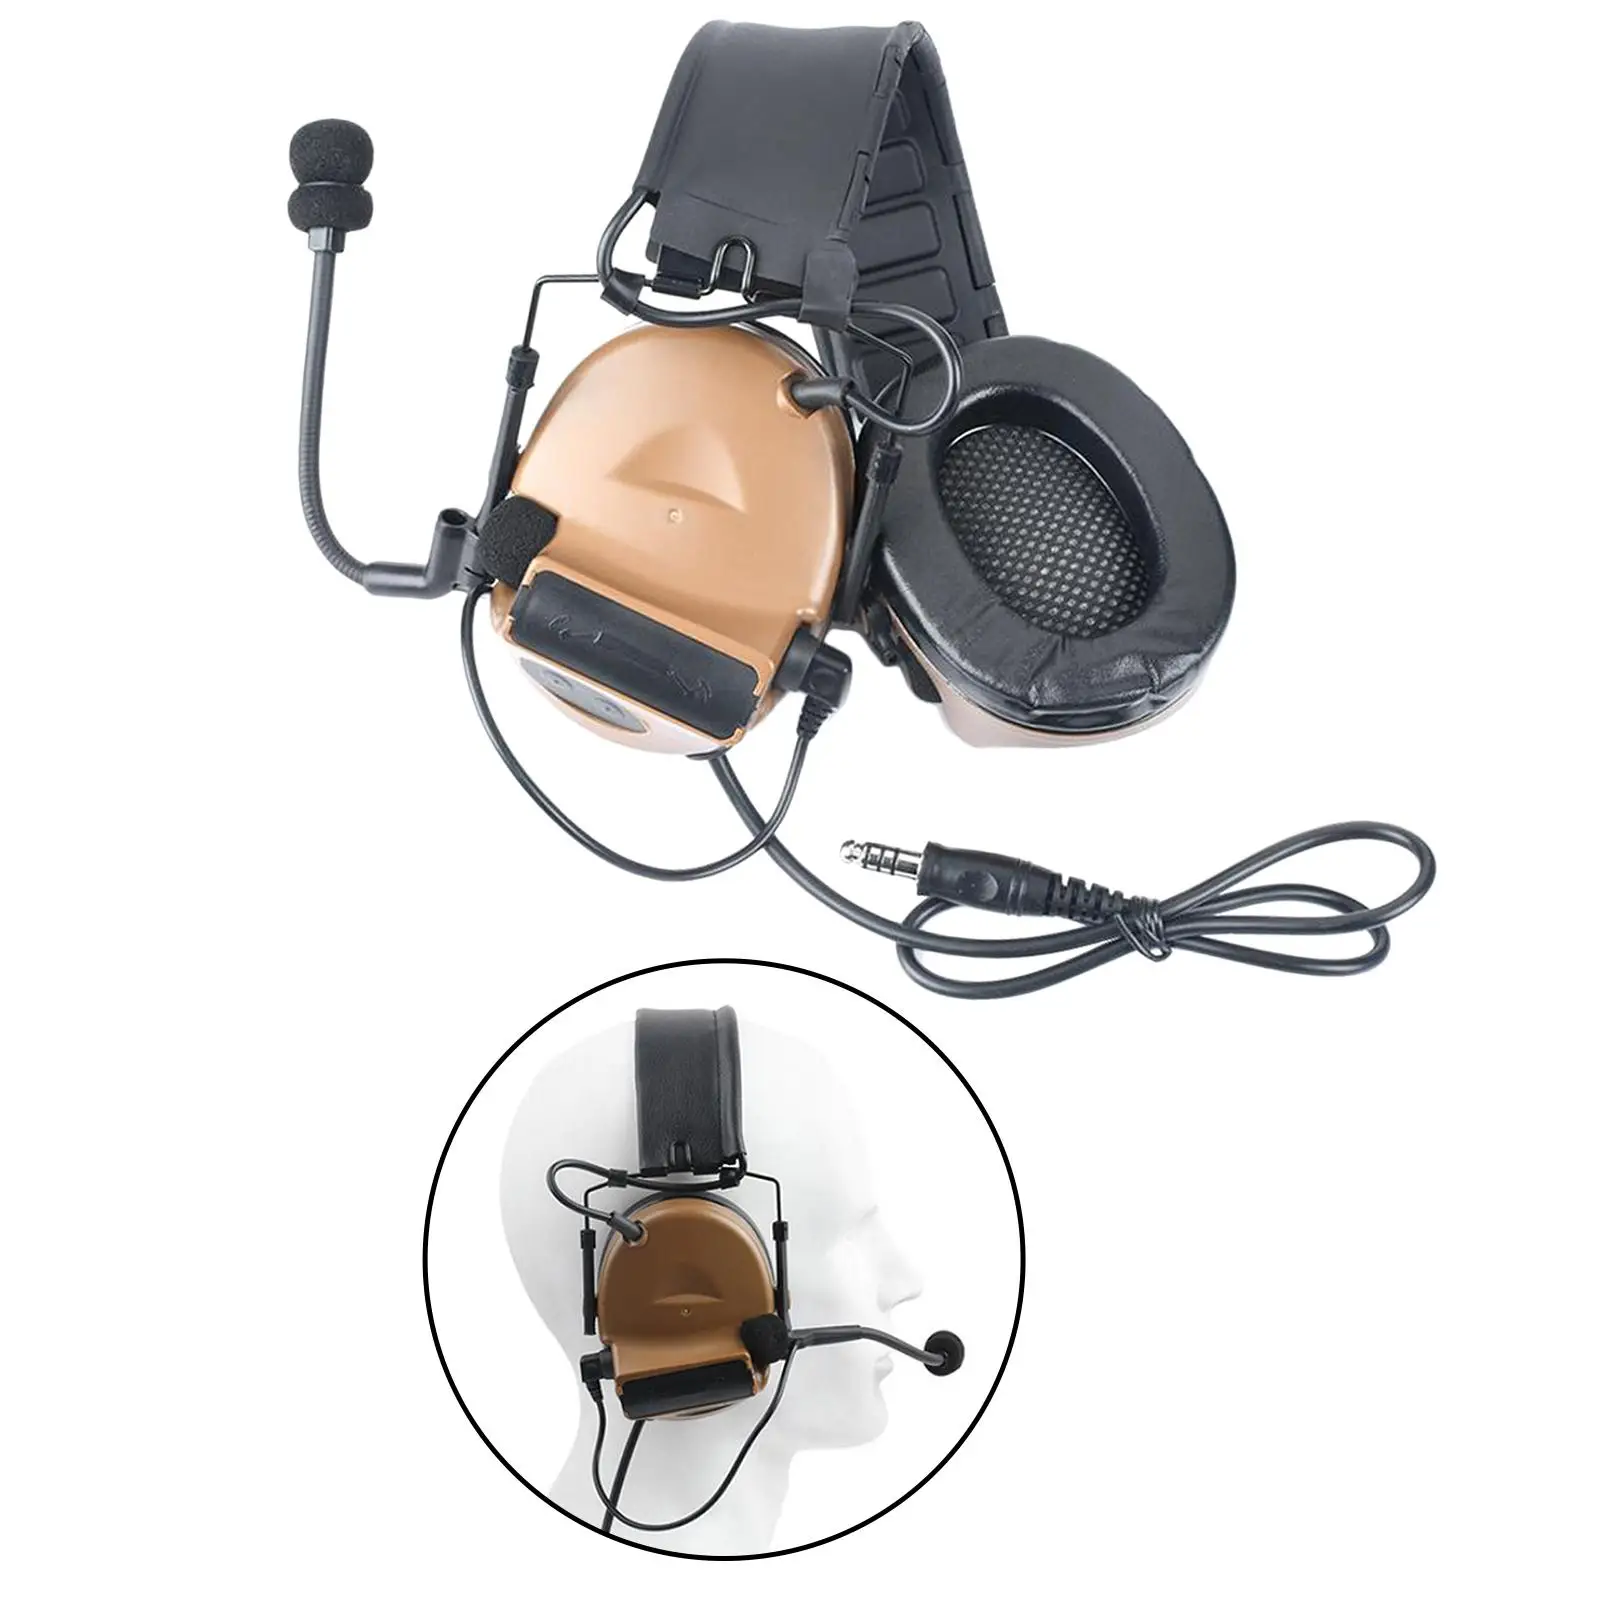 Noise Reduction Noise Free Hearing Defense Tactical Headphones for